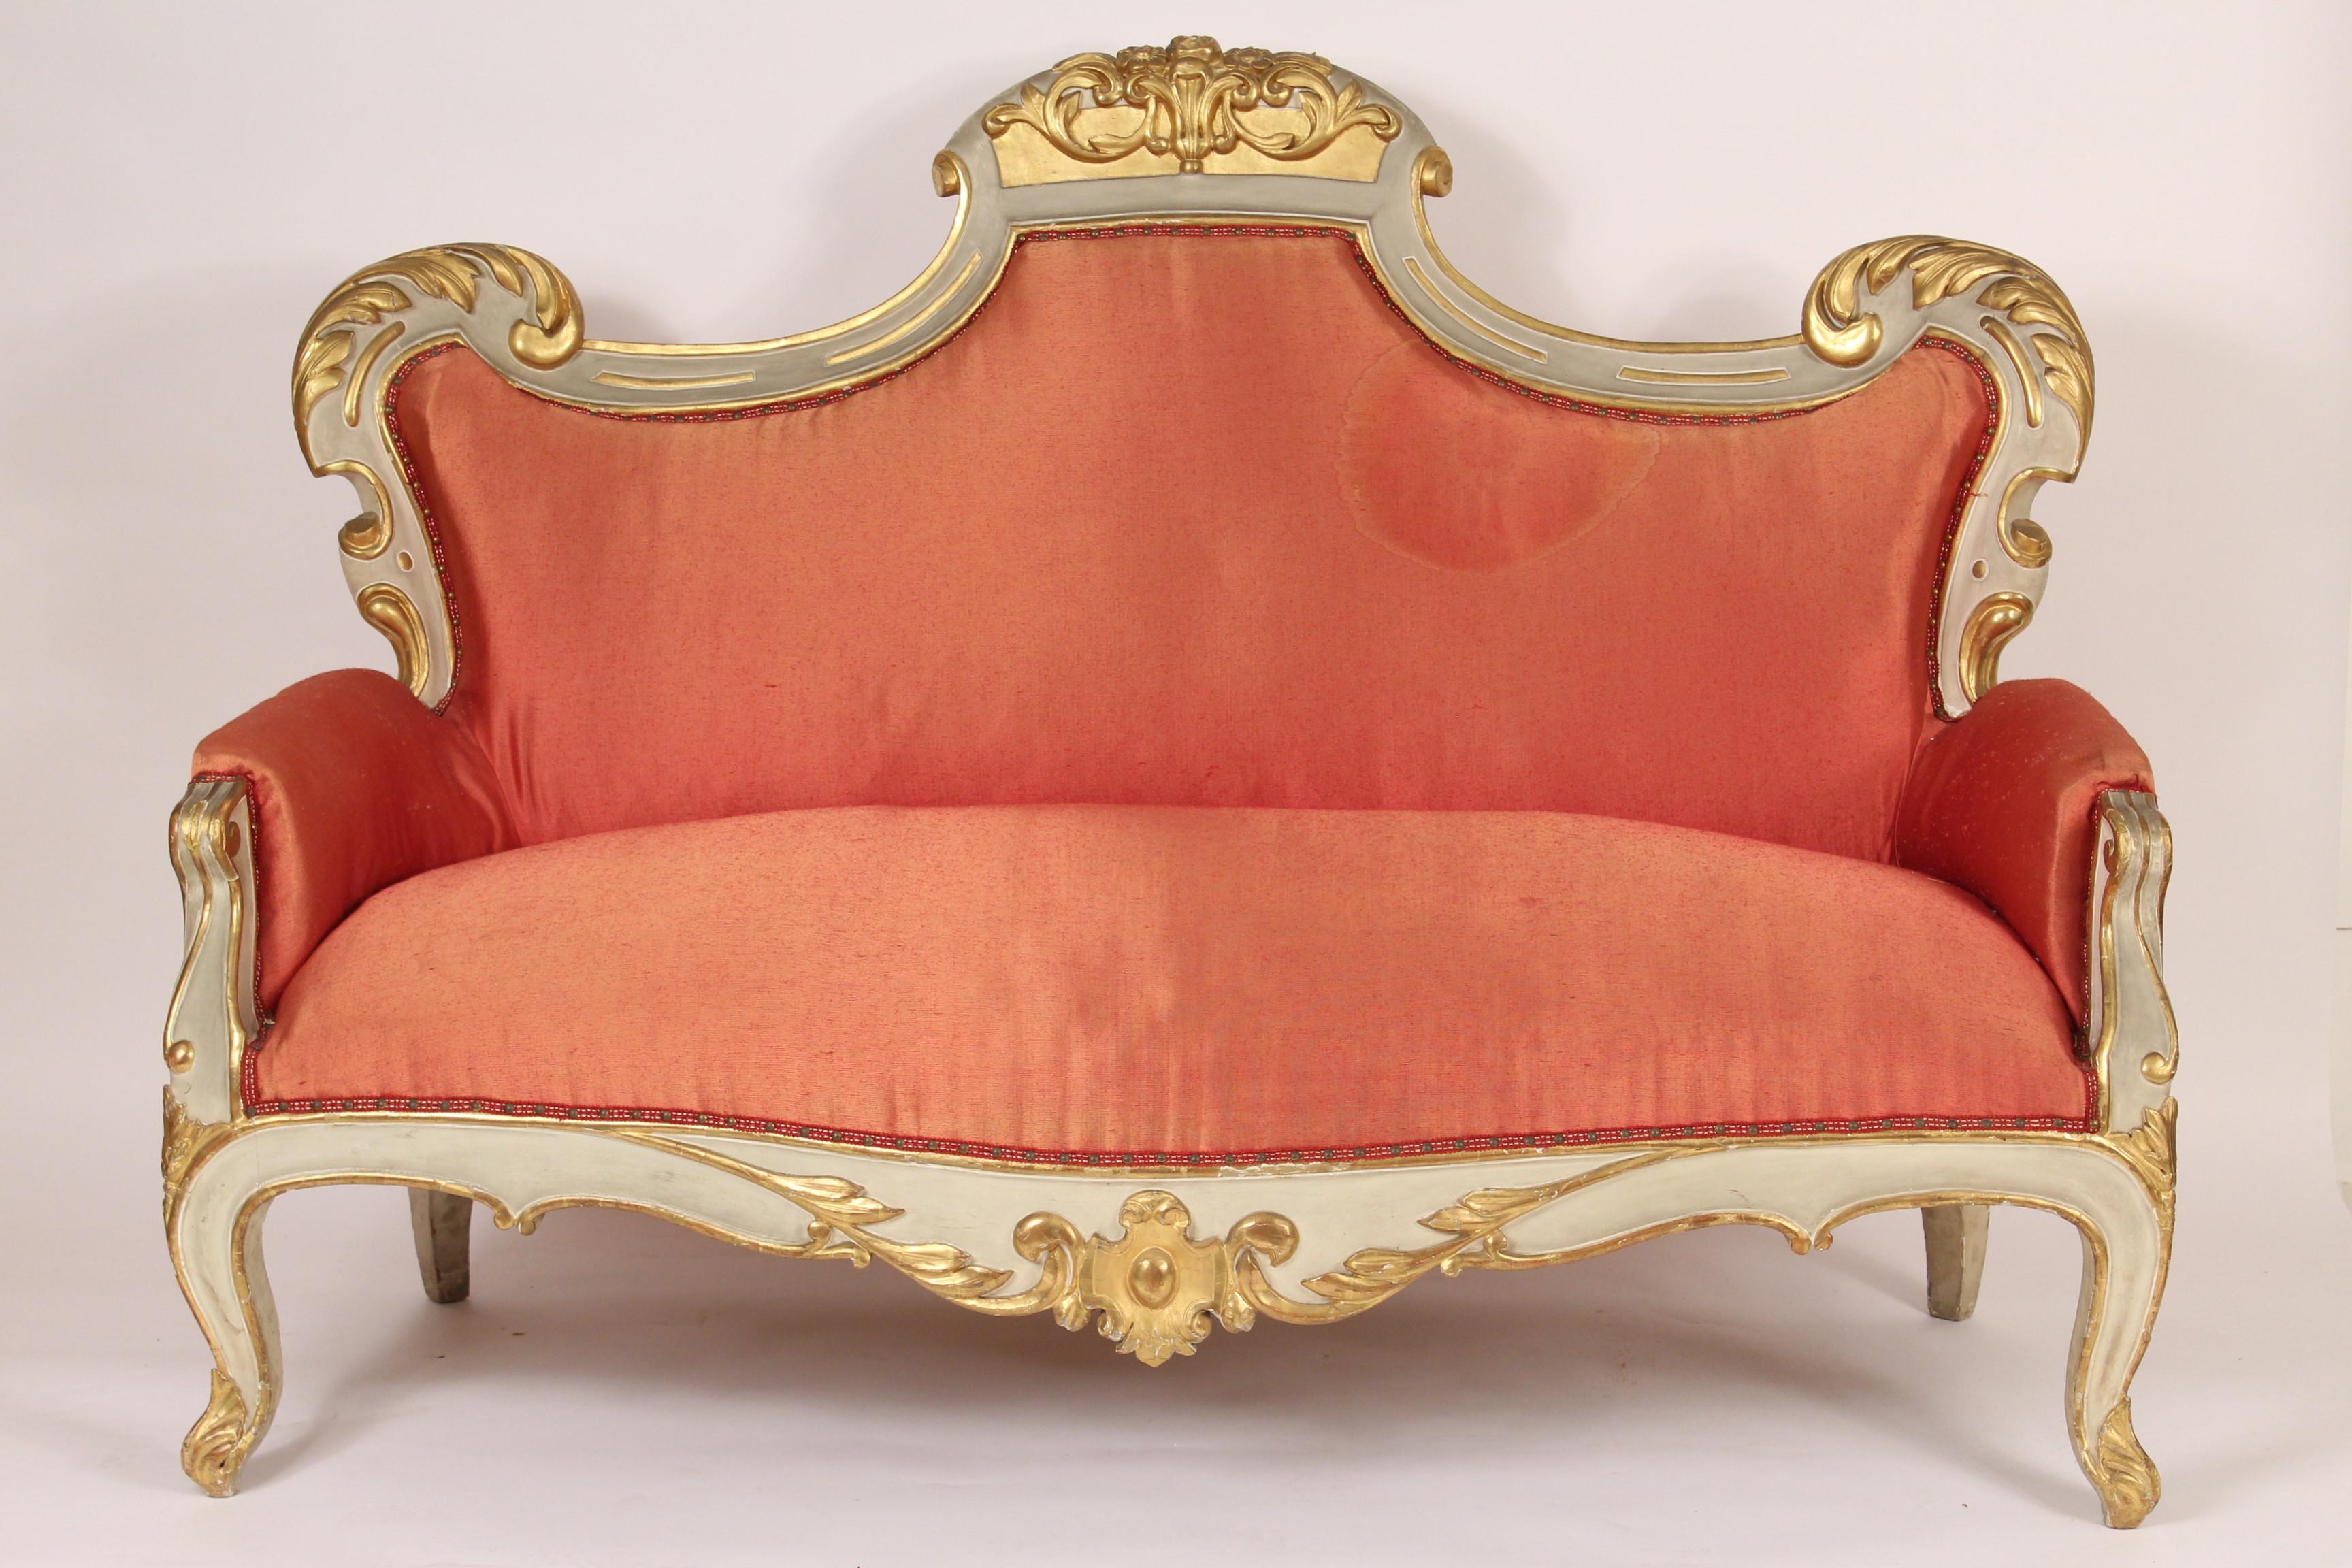 Napoleon III painted and partial gilt sofa / settee, circa 1870. The gilding on this sofa is gold leaf. The sofa has a deep seat that makes it comfortable to sit on.